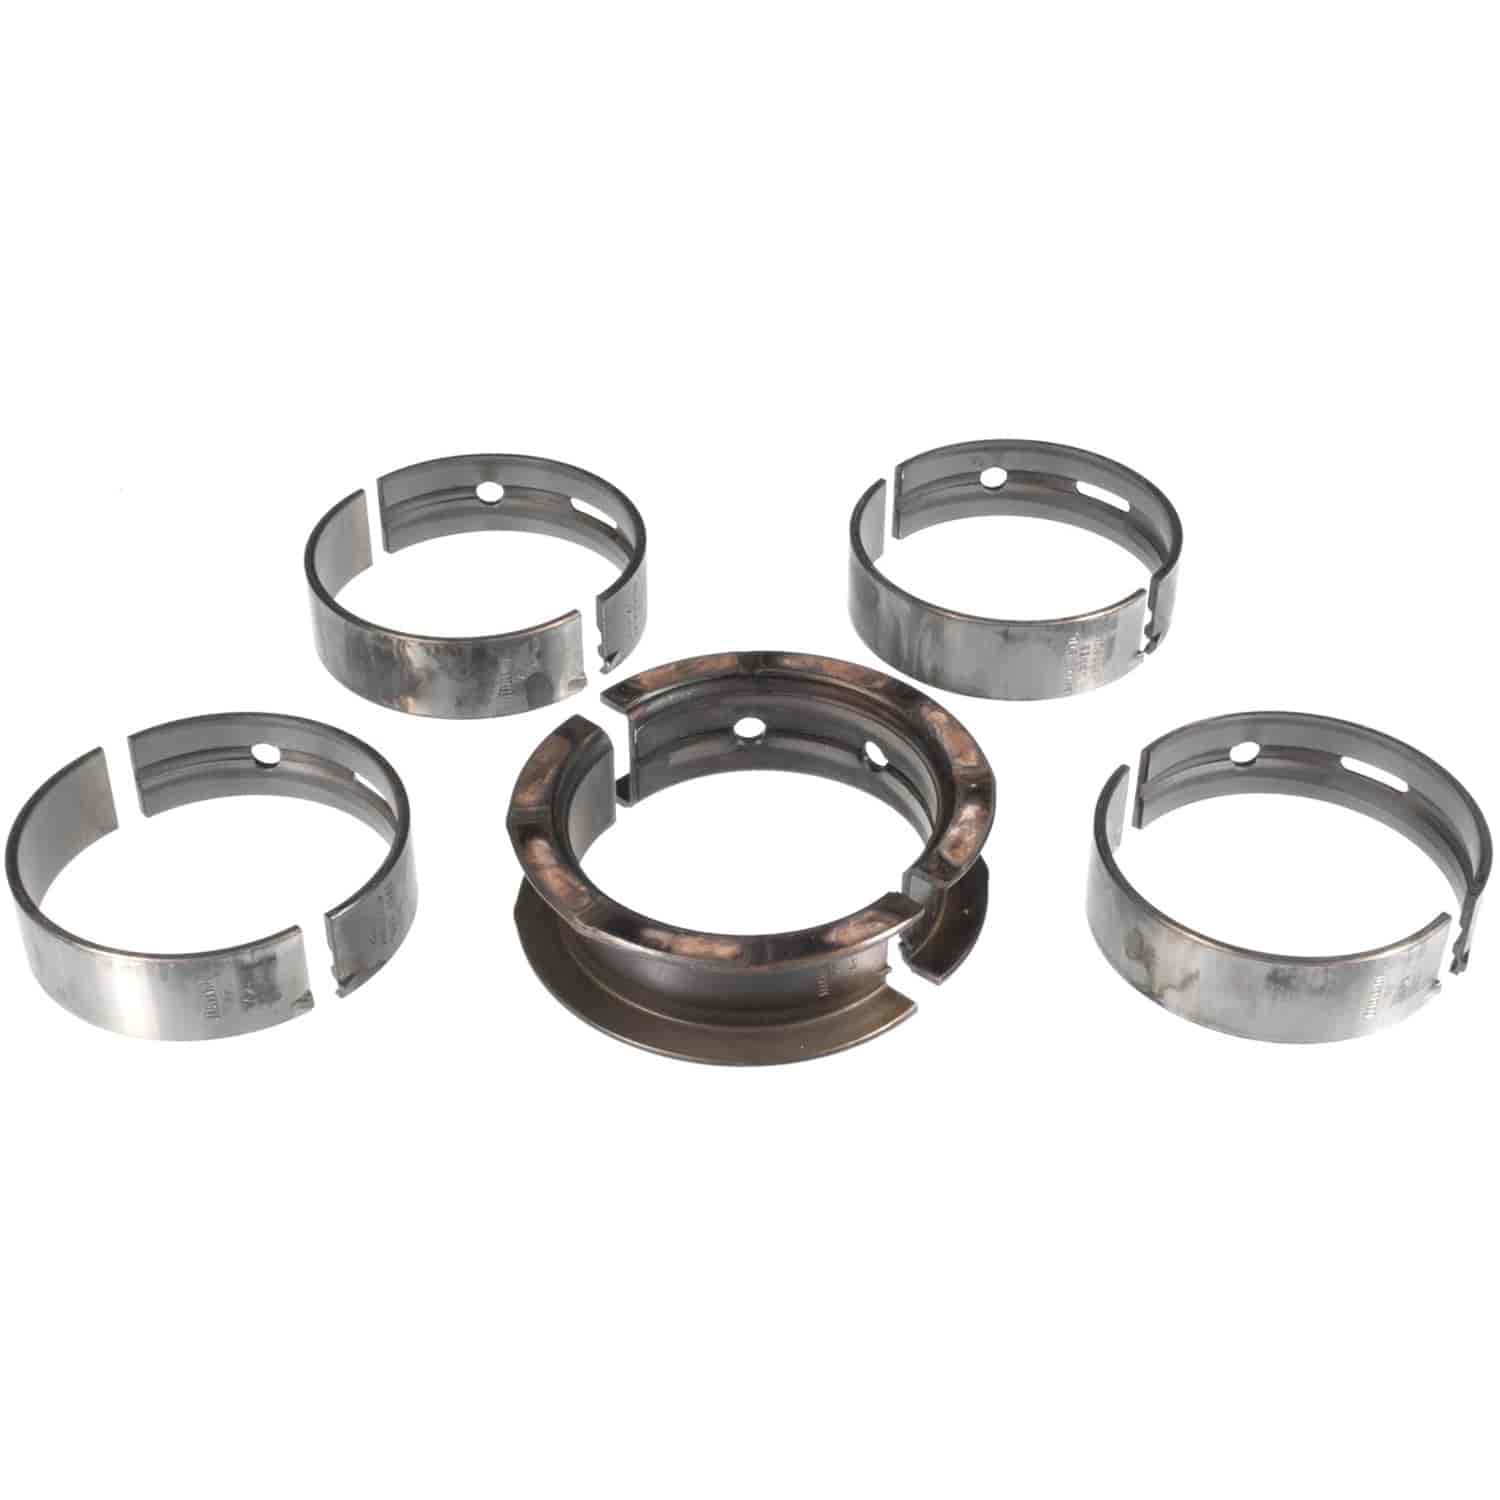 Main Bearing Set GM/Chevy 2006-2015 LS V8 6.2L Supercharged & 7.0L (LSA/LS7/LS9) with -.001" Undersize